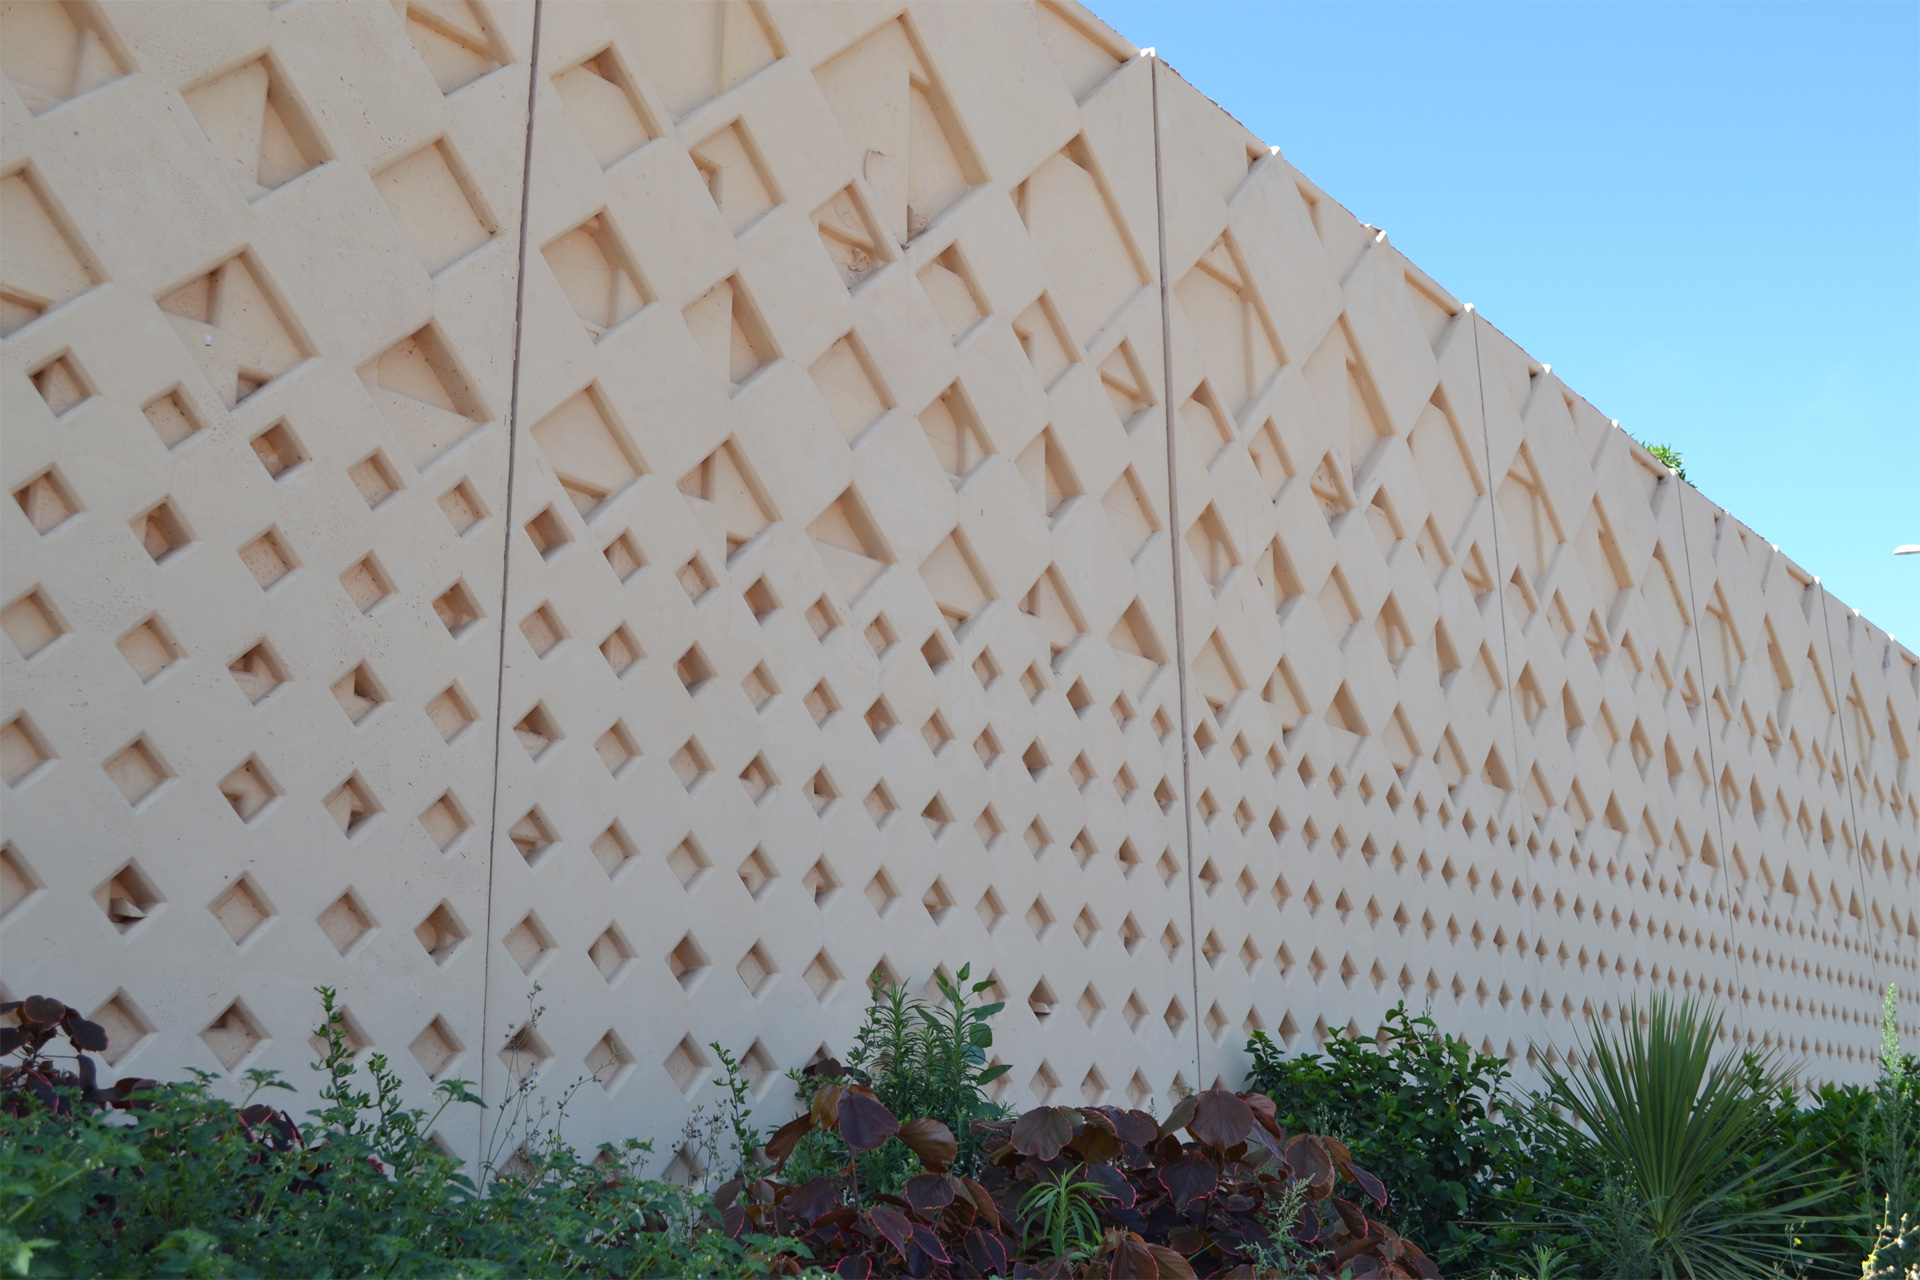 A wall with geometric diamond patterns and greenery at the base under a blue sky